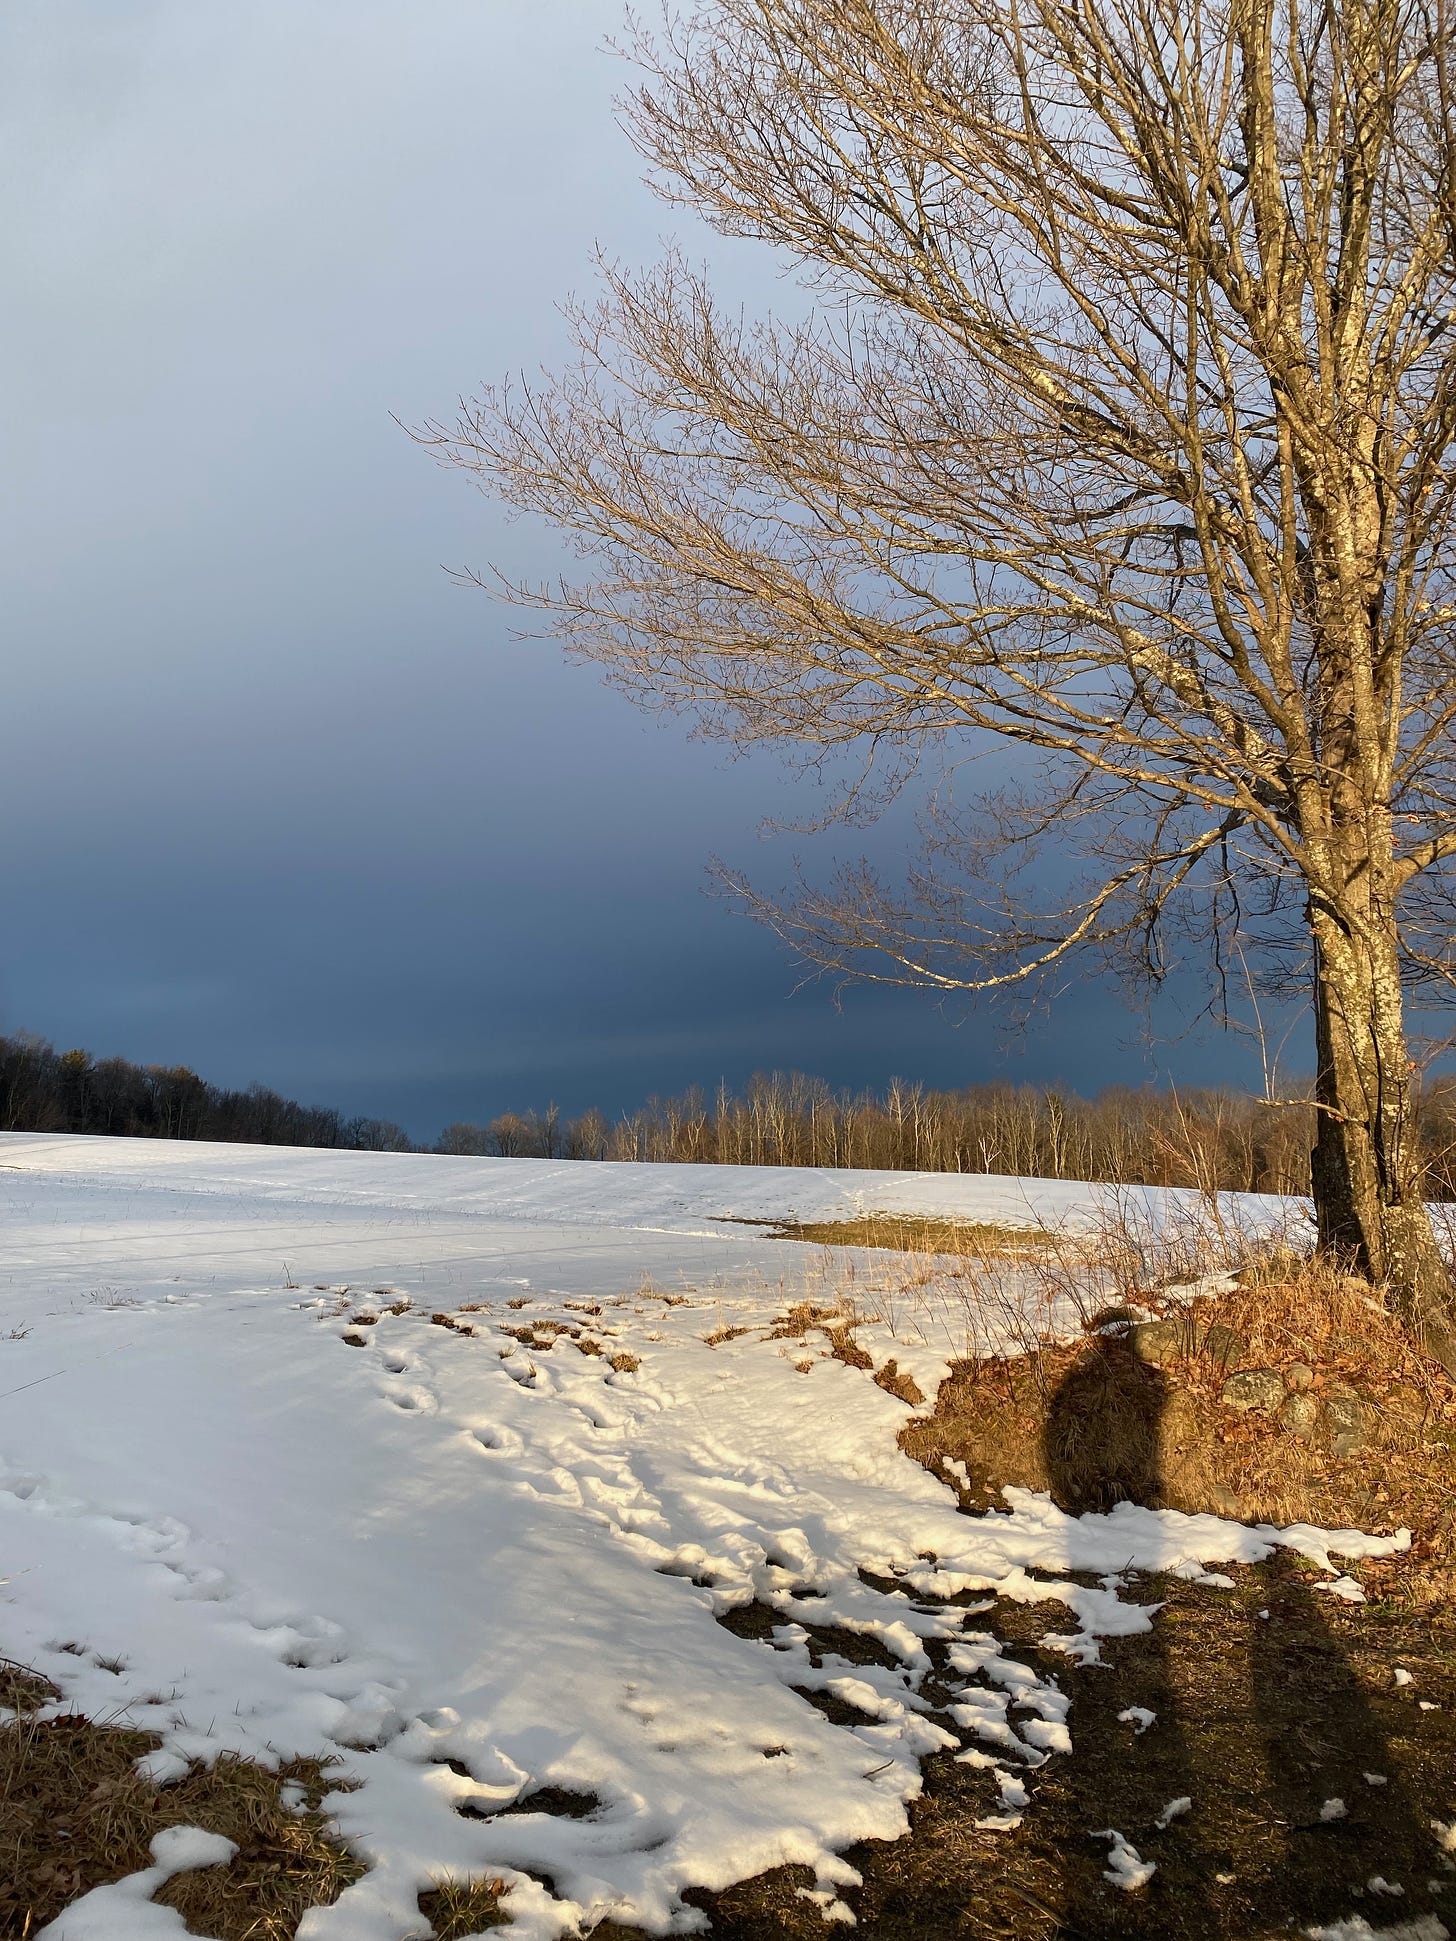 A snowy field under a dramatic blue and grey sky. One tree is backlit golden by the sun.